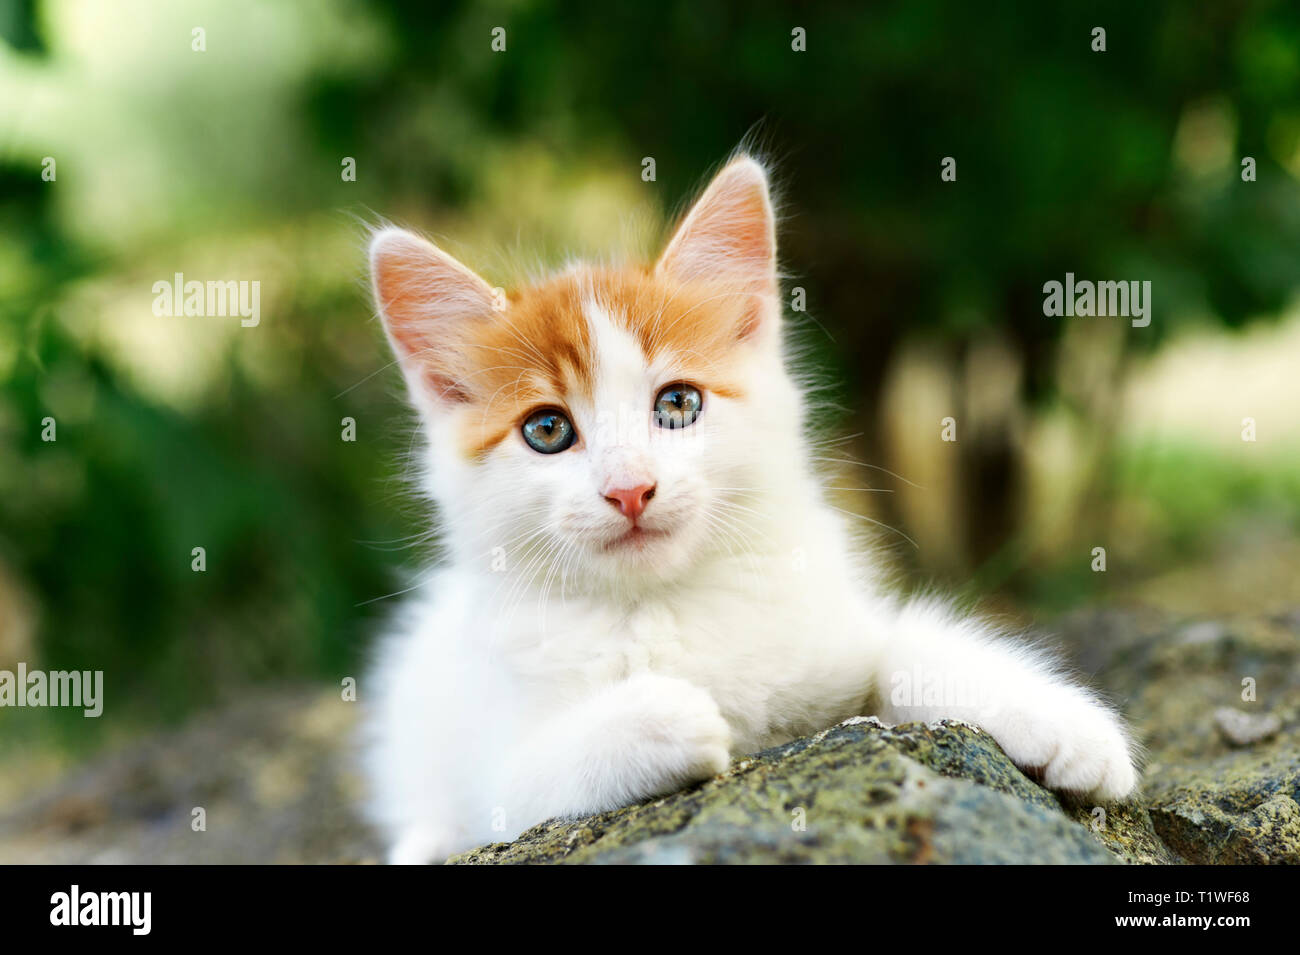 Front view of a beautiful white and red kitten lying on a stone outdoors Stock Photo